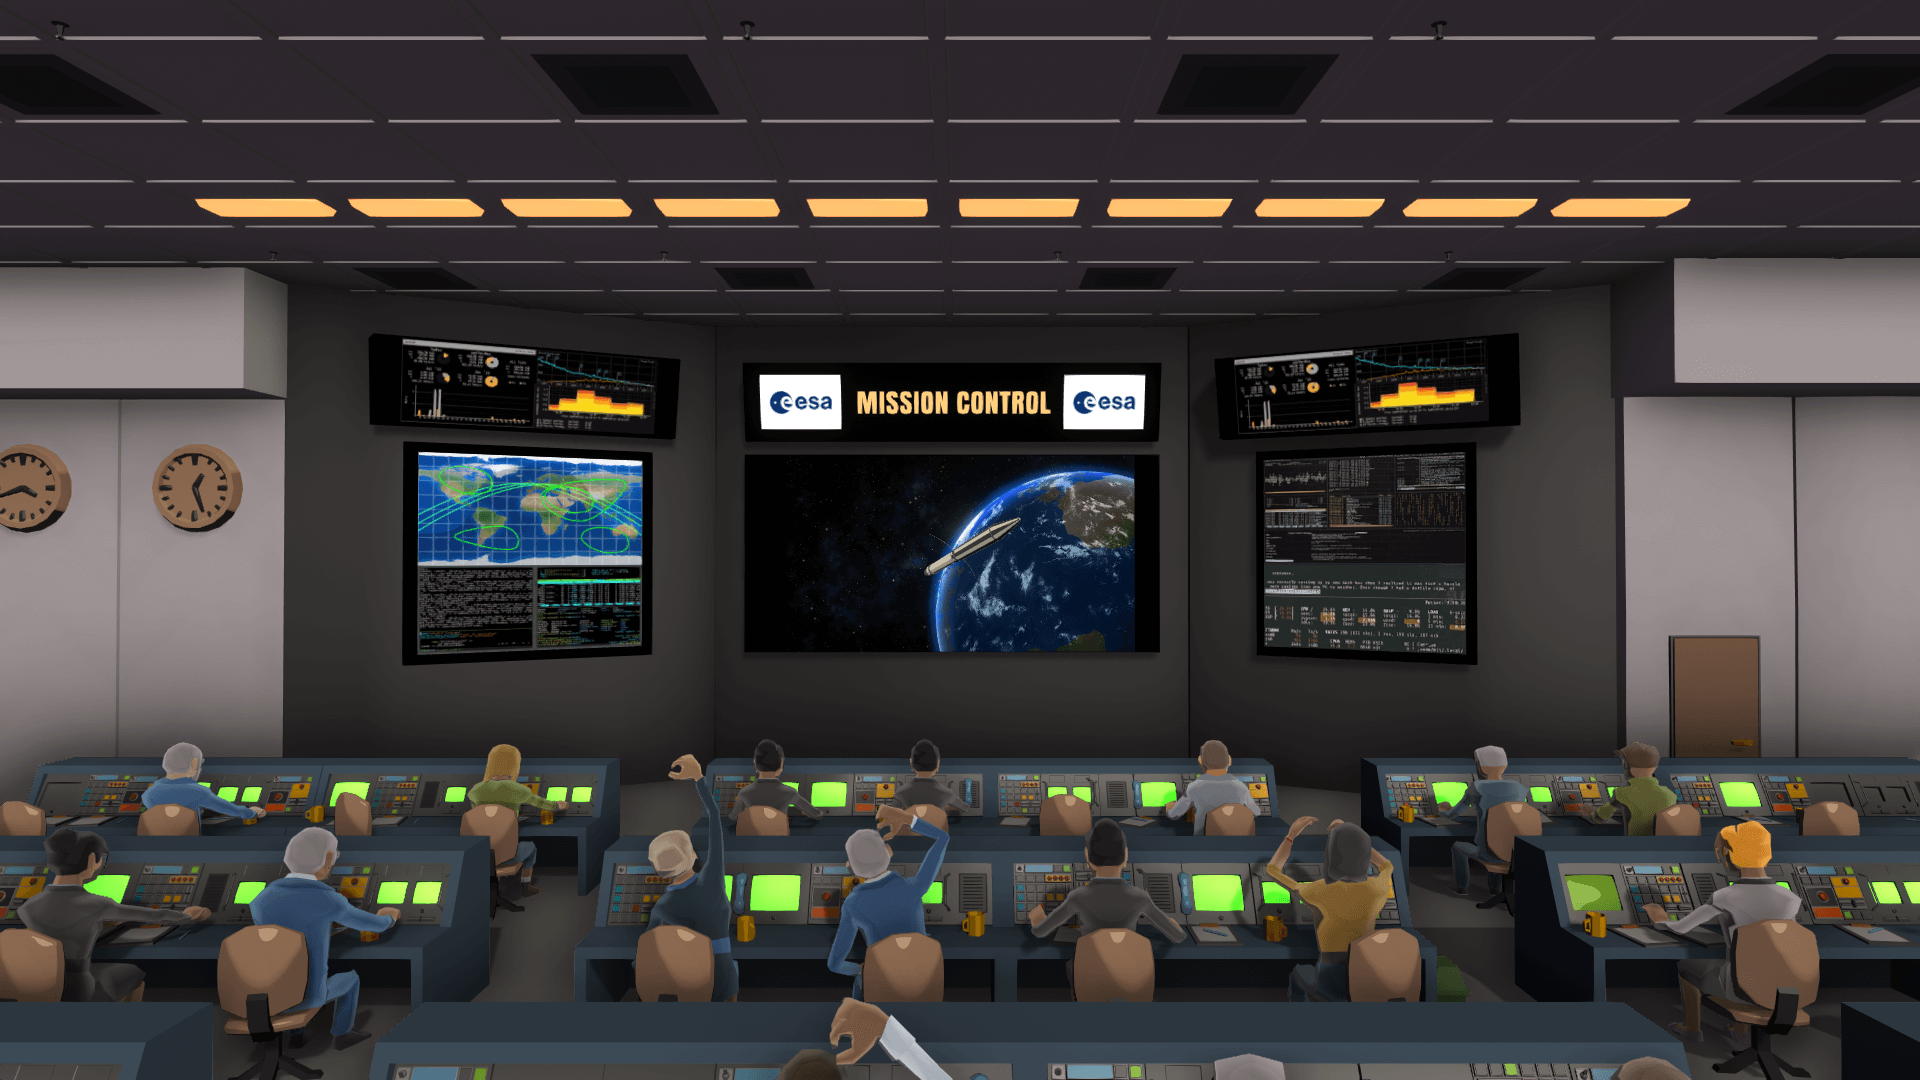 http://www.cosmocover.com/wp-content/uploads/2020/04/ESA-mission-control.png